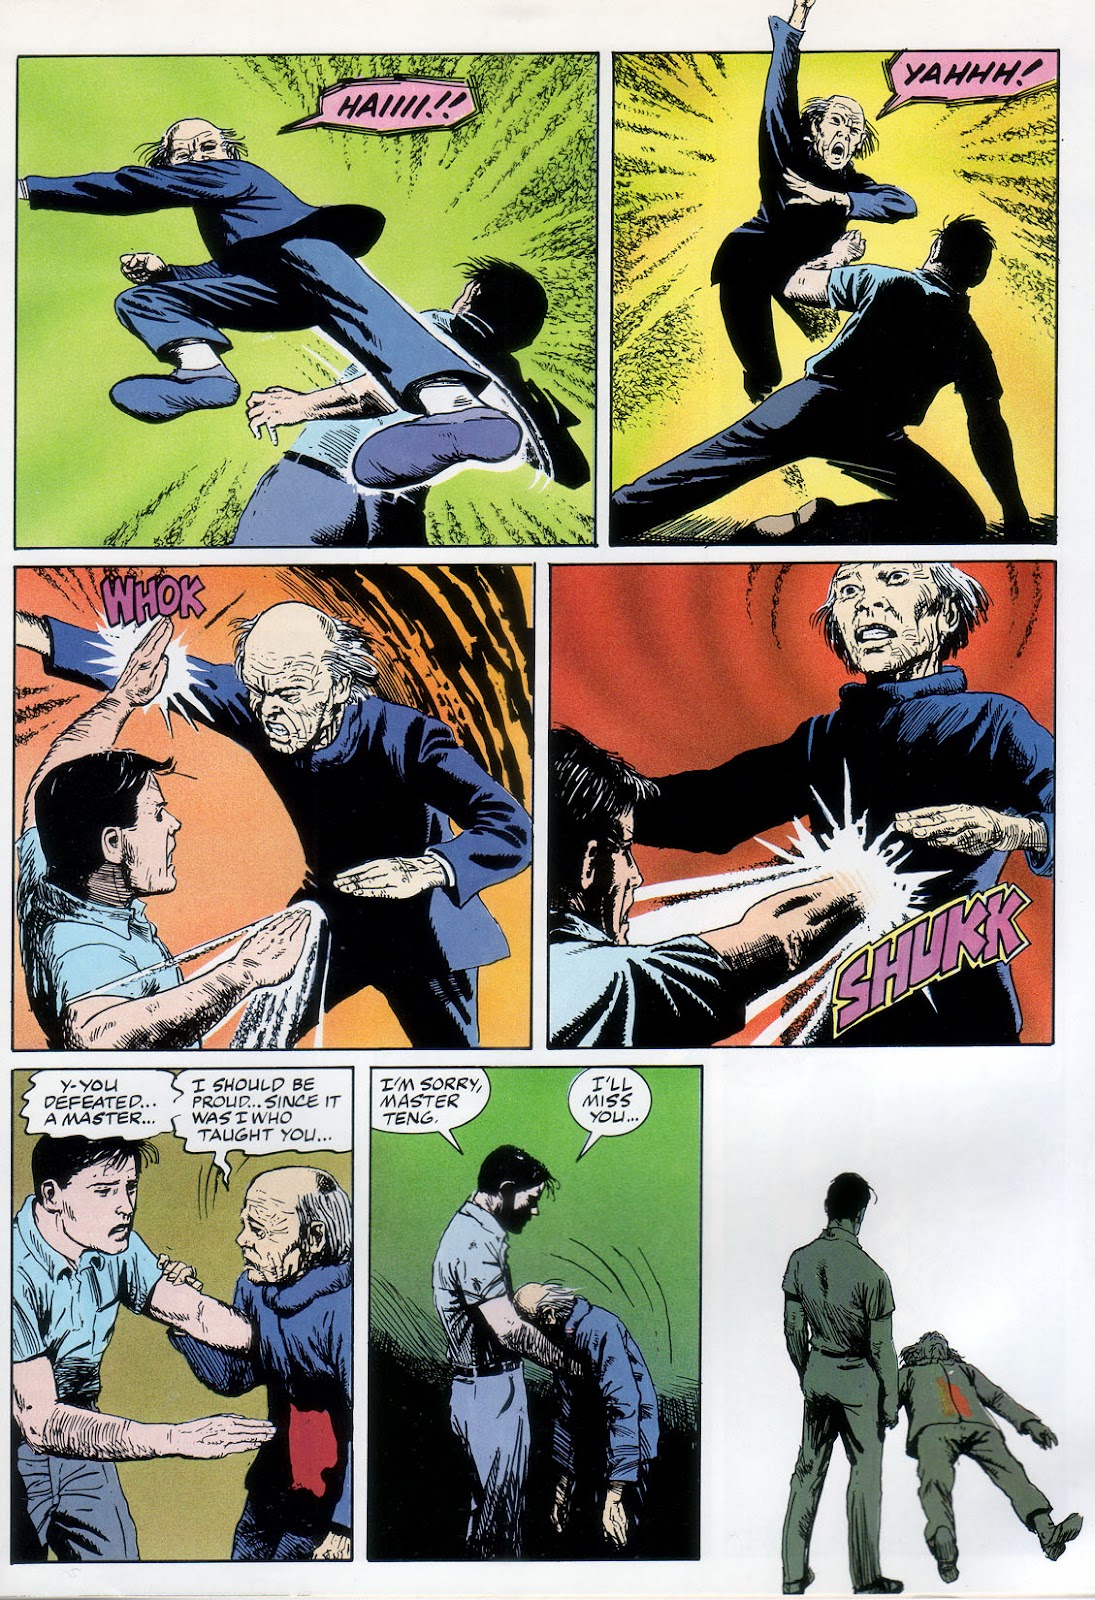 Marvel Graphic Novel issue 57 - Rick Mason - The Agent - Page 77